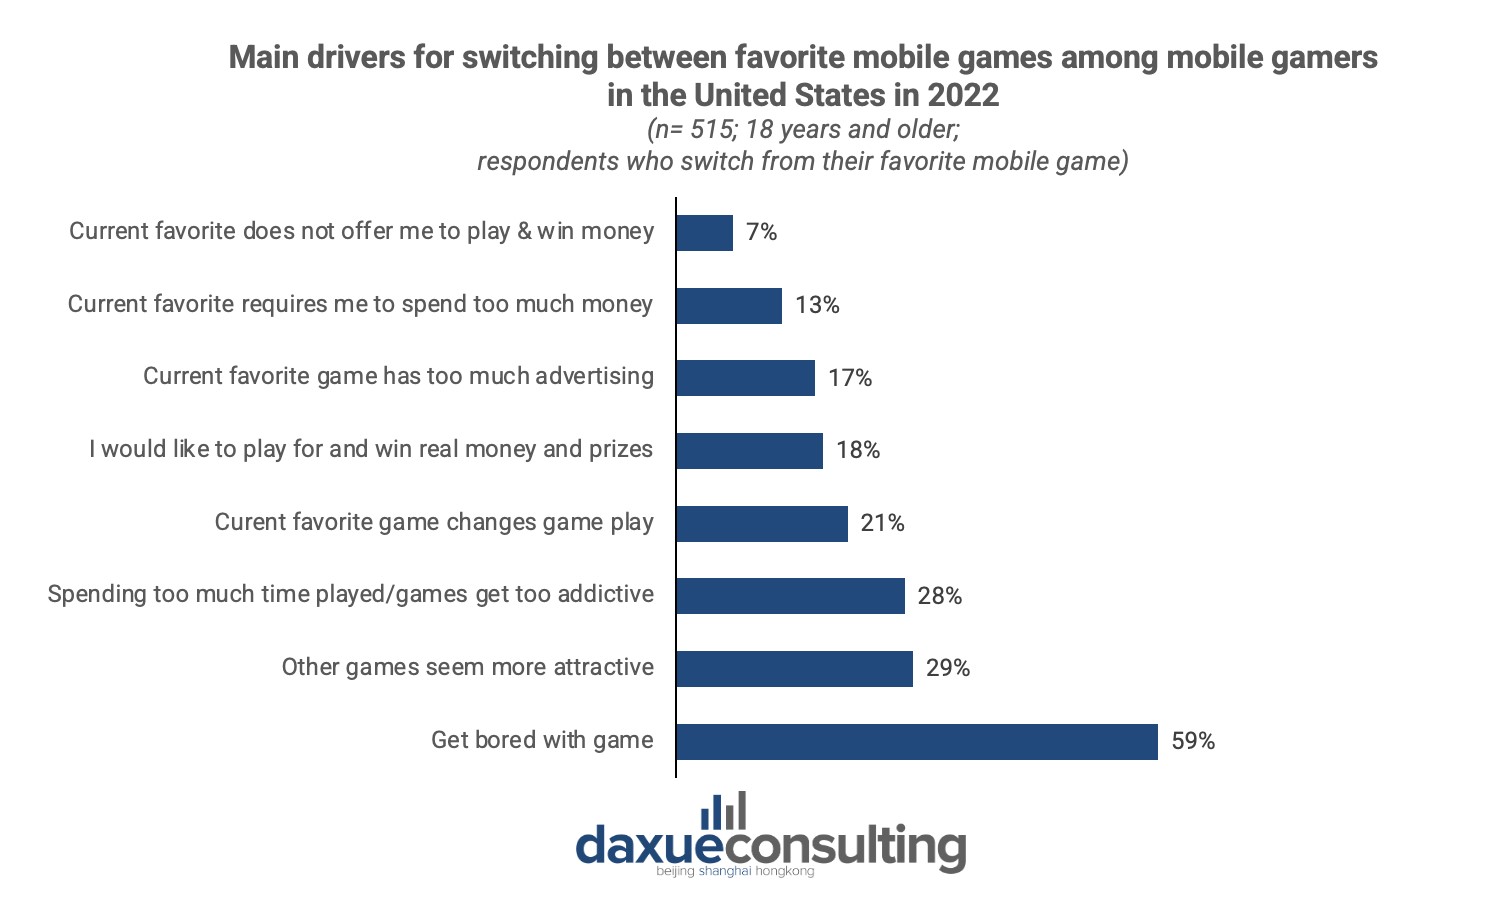 mobile gamers in the United States as of October 2022